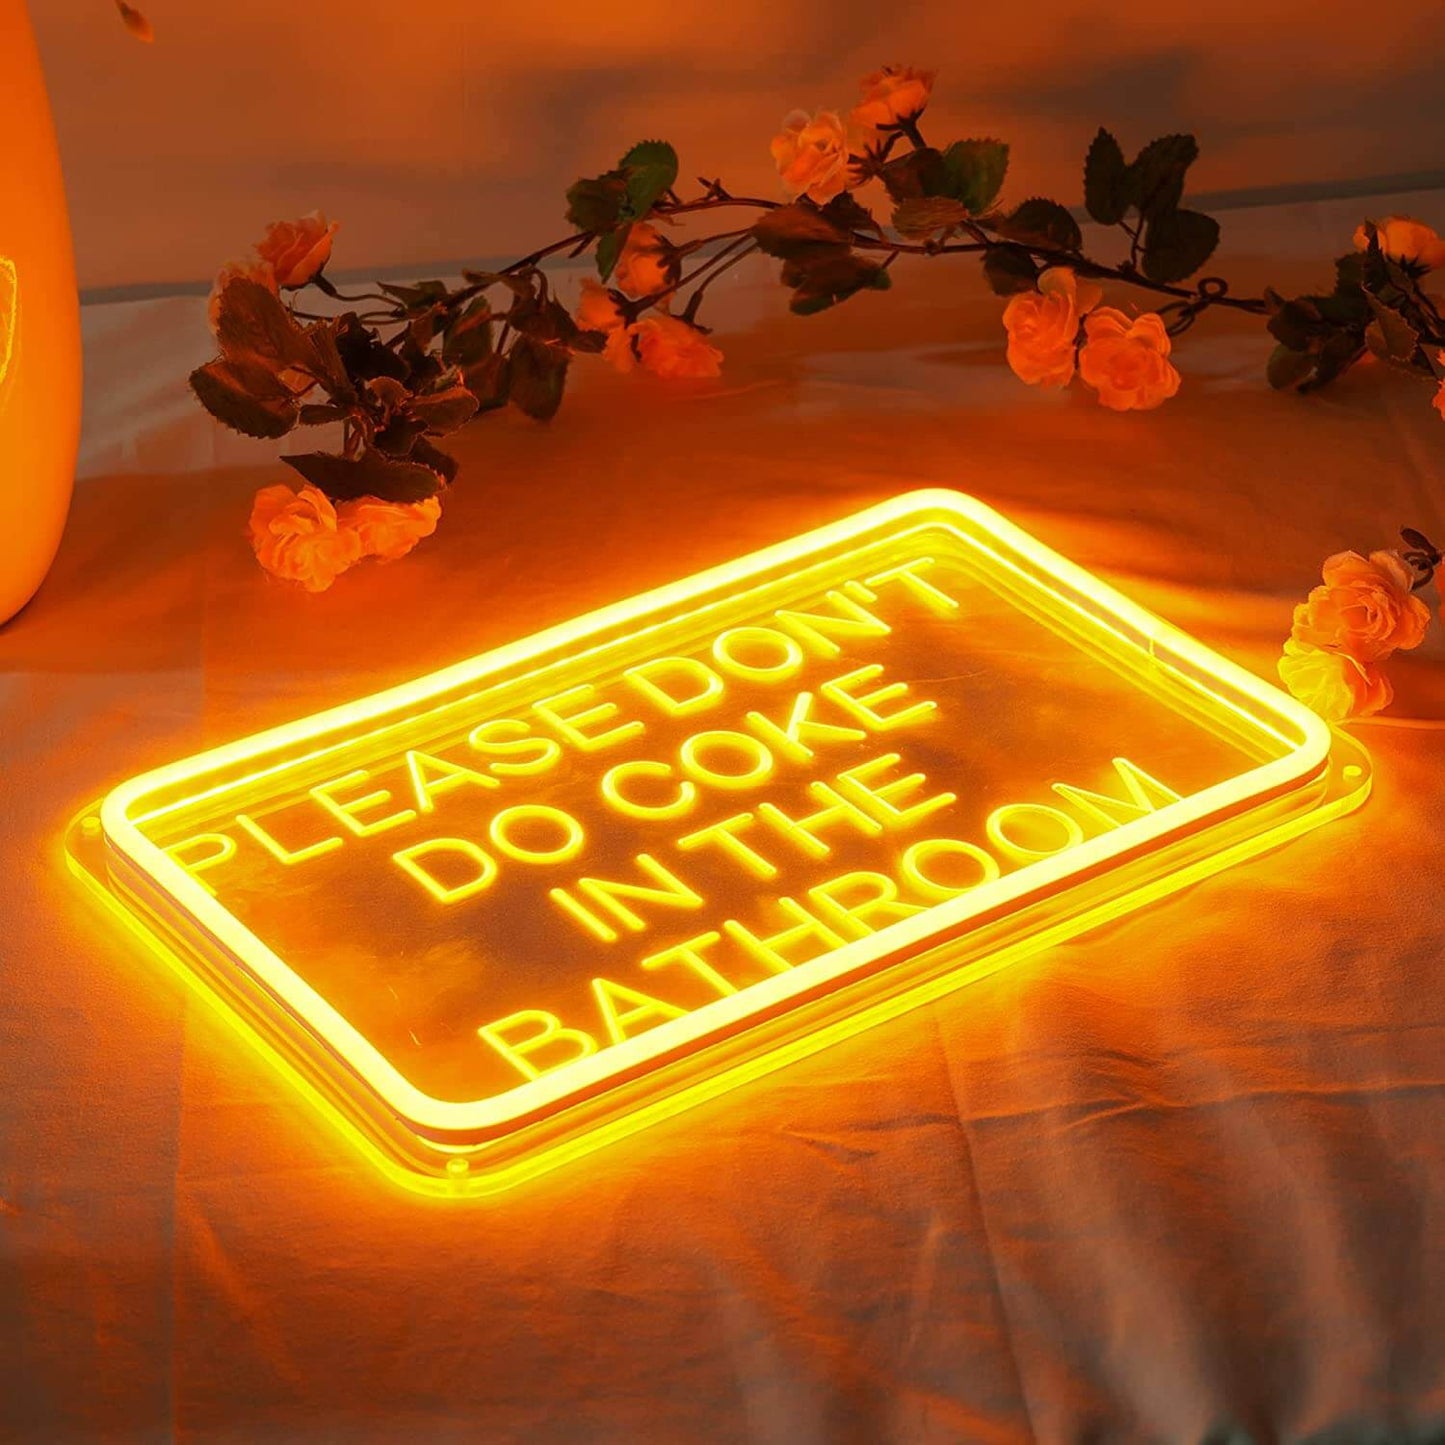 DONT COKE IN THE BATHROOM - LED Neon Sign (7.5"x11.8")(USB)